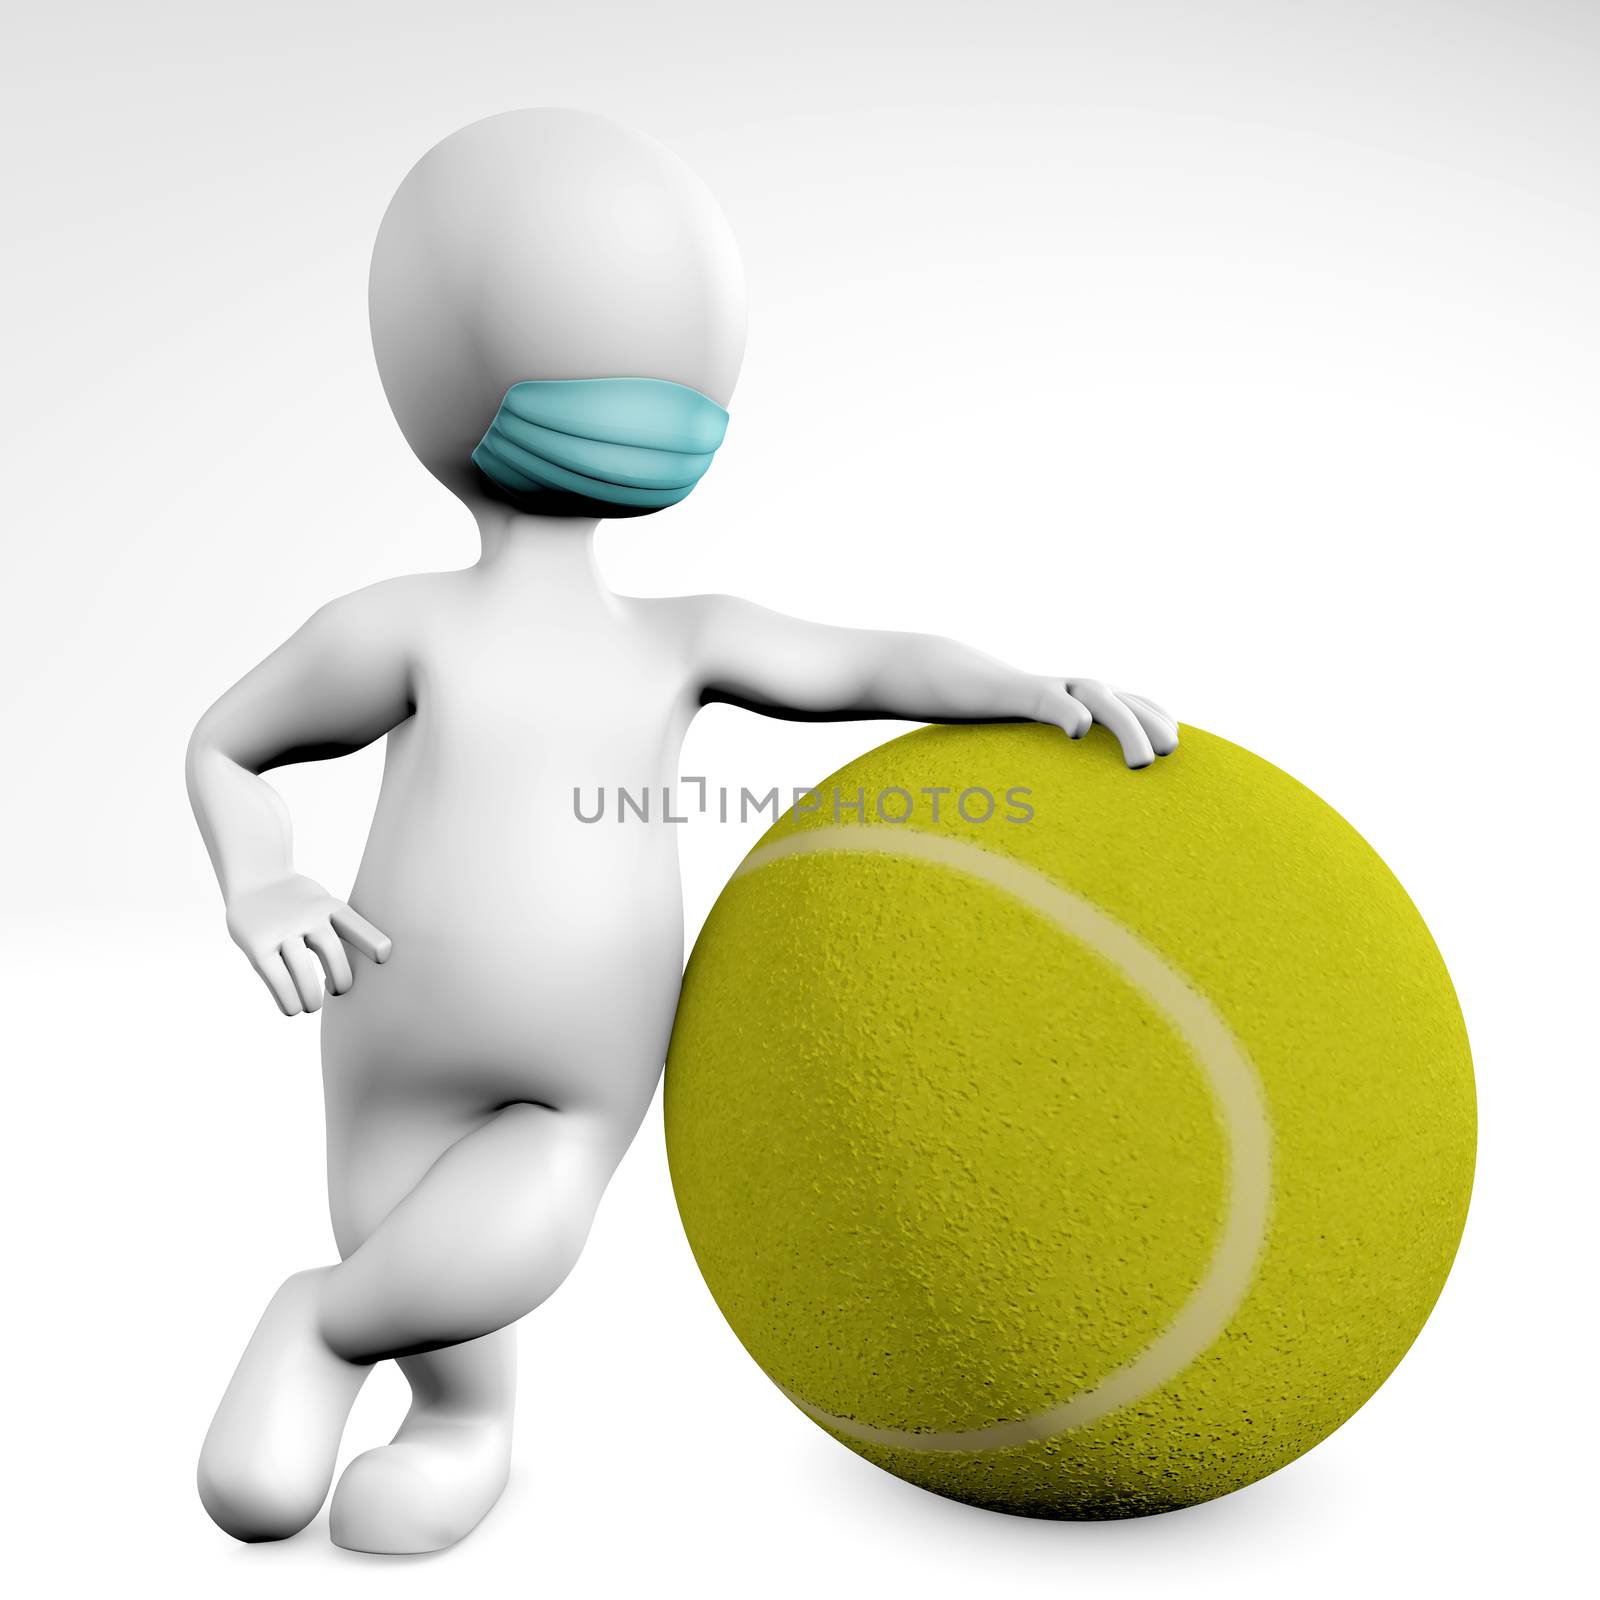 Man with a mask with a ball for tennis 3d rendering by F1b0nacci